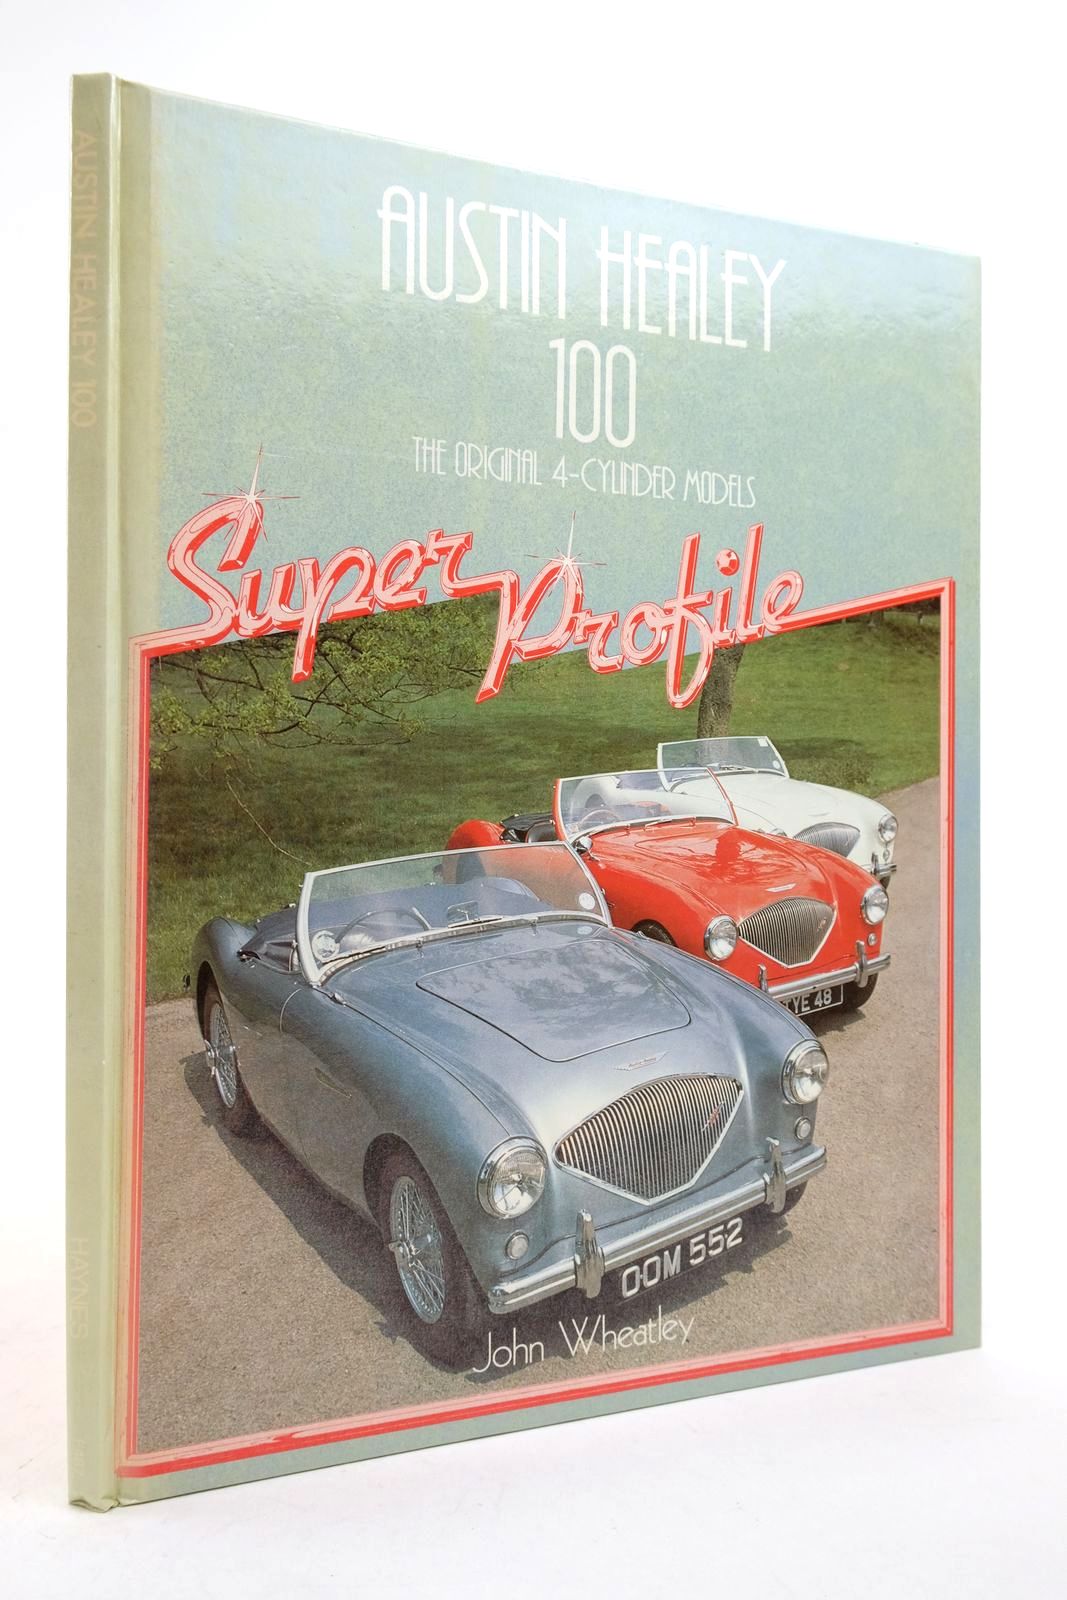 Photo of AUSTIN HEALEY 100 THE ORIGINAL 4-CYLINDER MODELS written by Wheatley, John published by Haynes Publishing Group, Foulis (STOCK CODE: 2139542)  for sale by Stella & Rose's Books